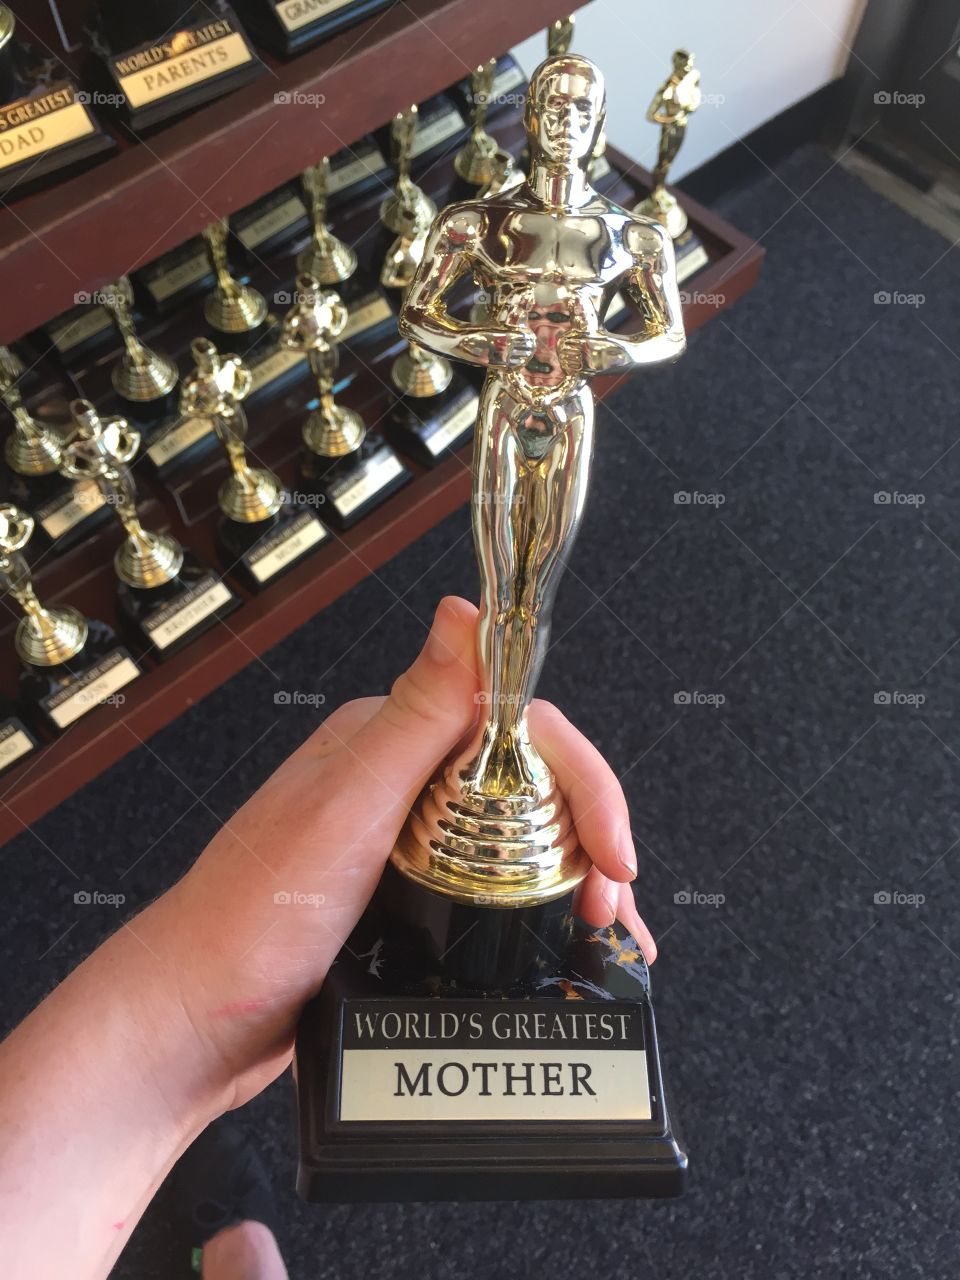 World's Greatest Mom. An award for the worlds greatest mom